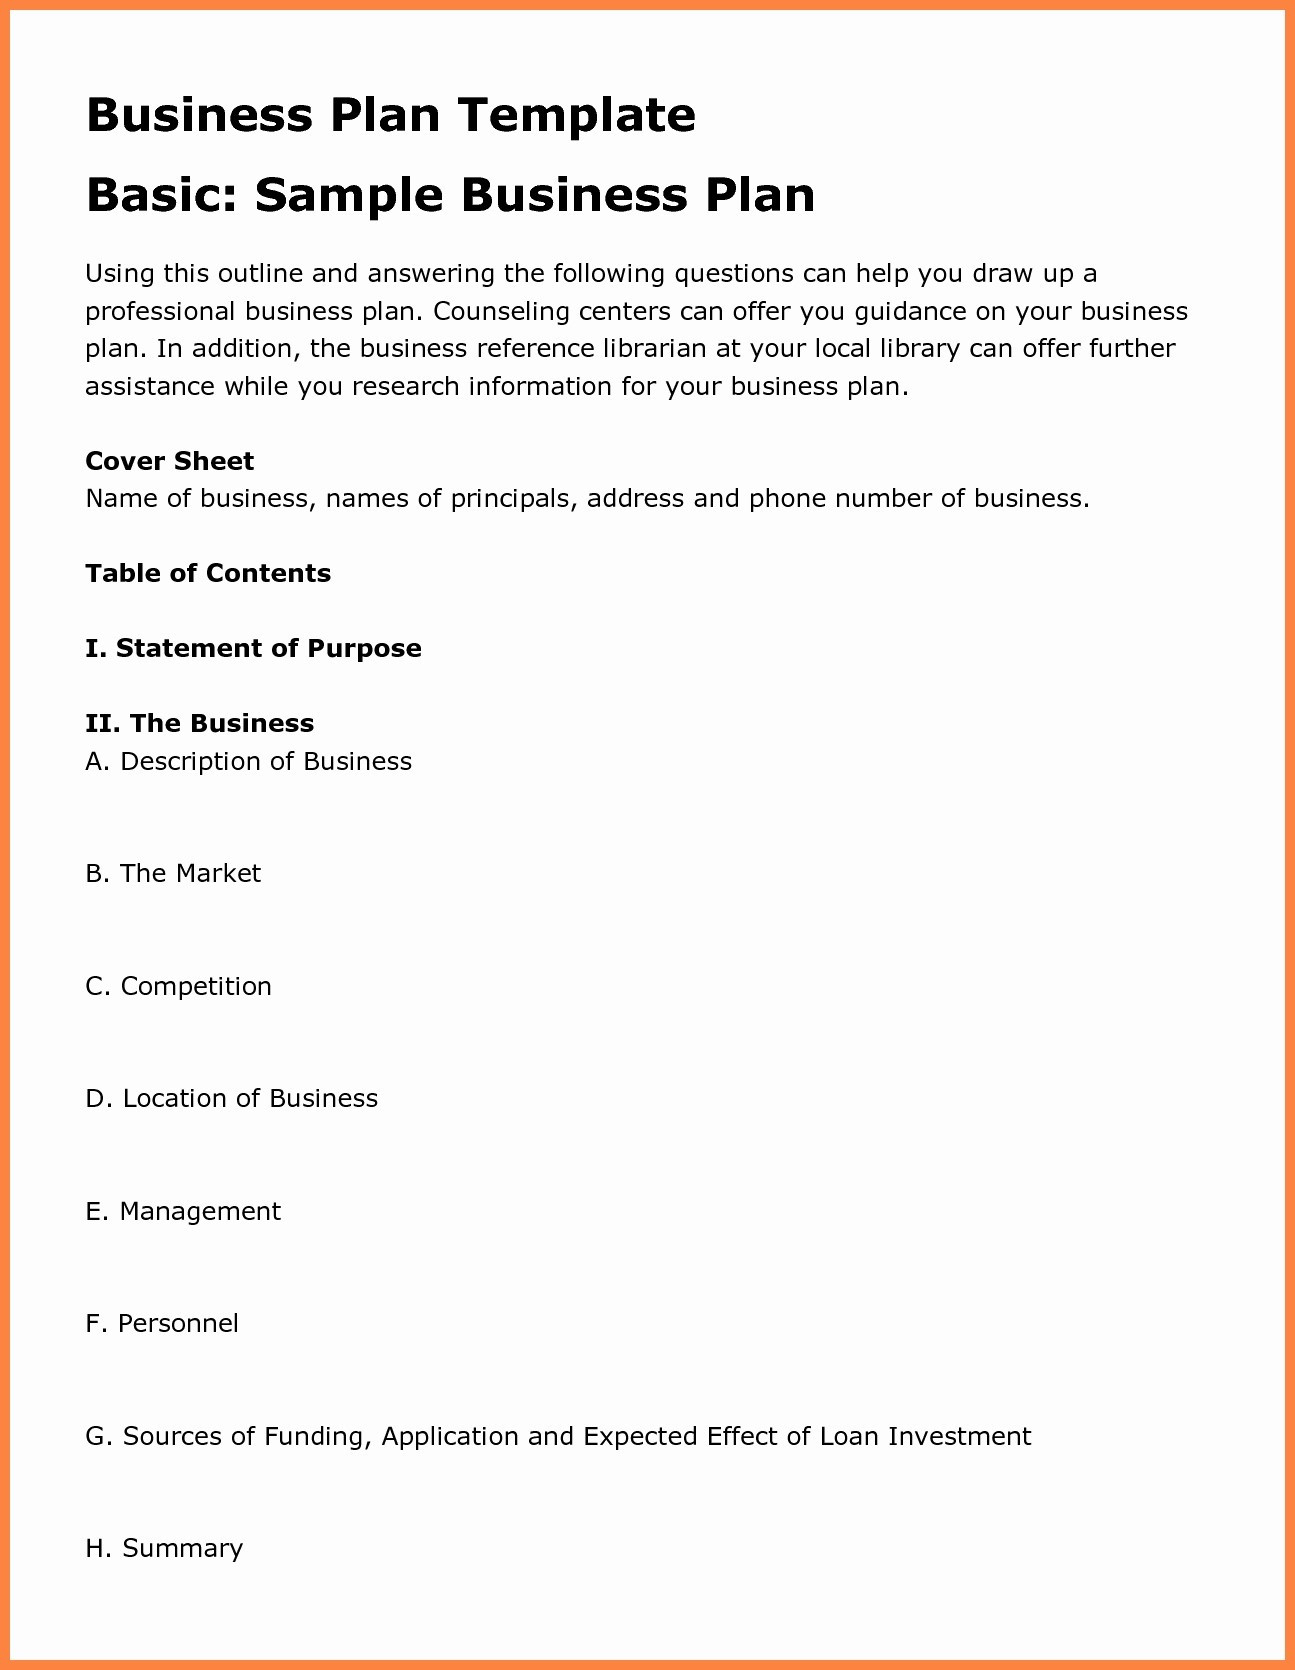 Free Pub Business Plan Template Brewery Popular Valid ~ Tinypetition pertaining to Free Pub Business Plan Template